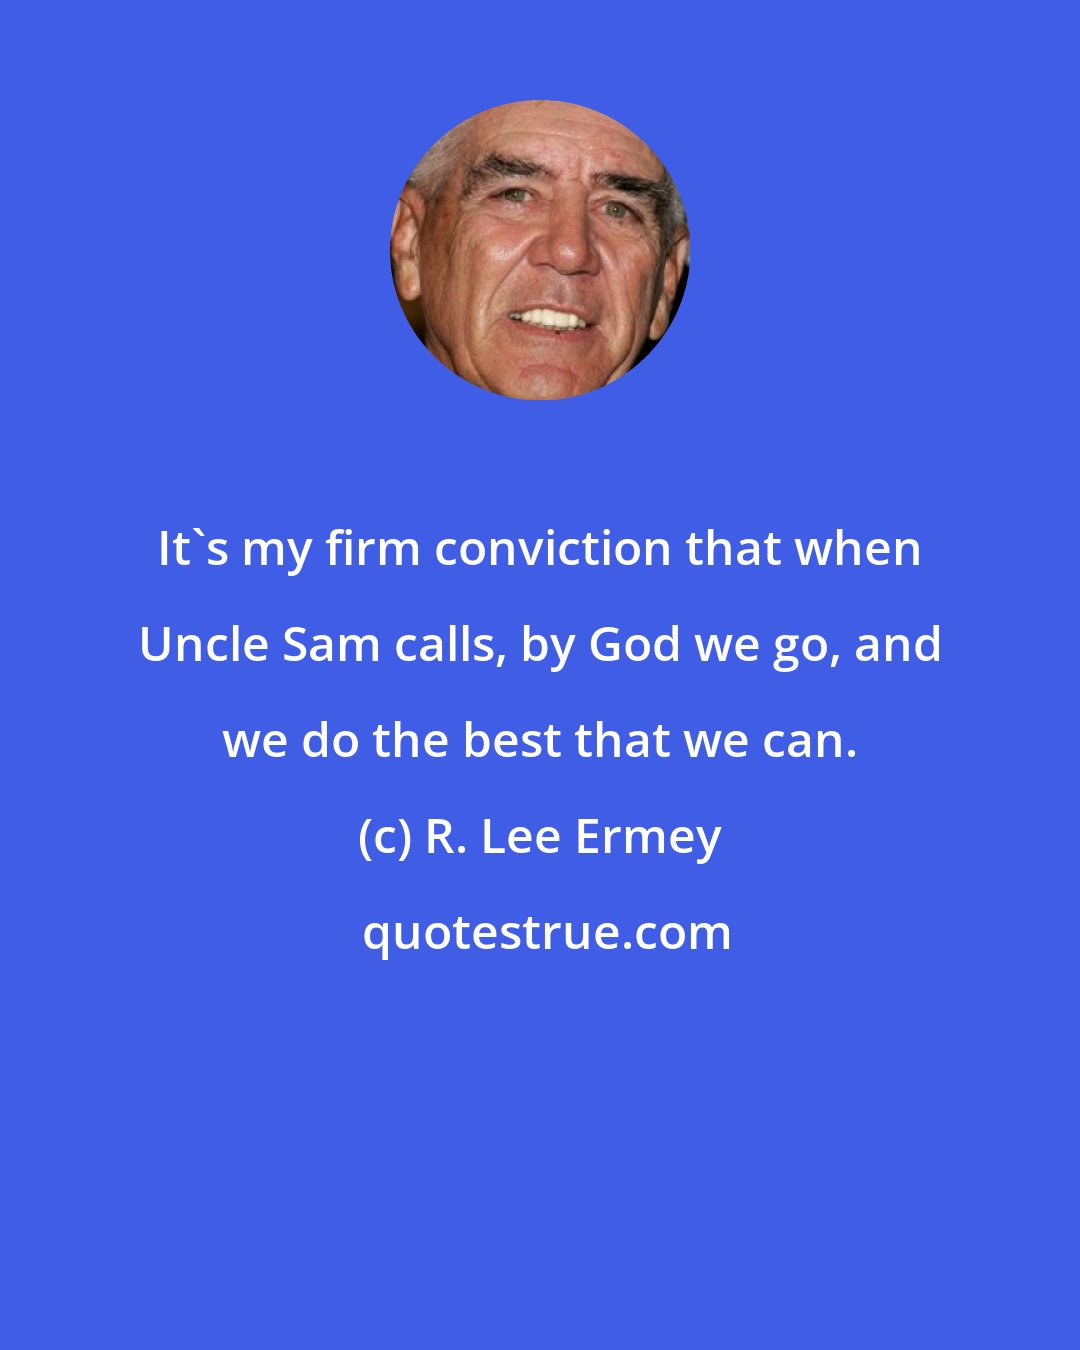 R. Lee Ermey: It's my firm conviction that when Uncle Sam calls, by God we go, and we do the best that we can.